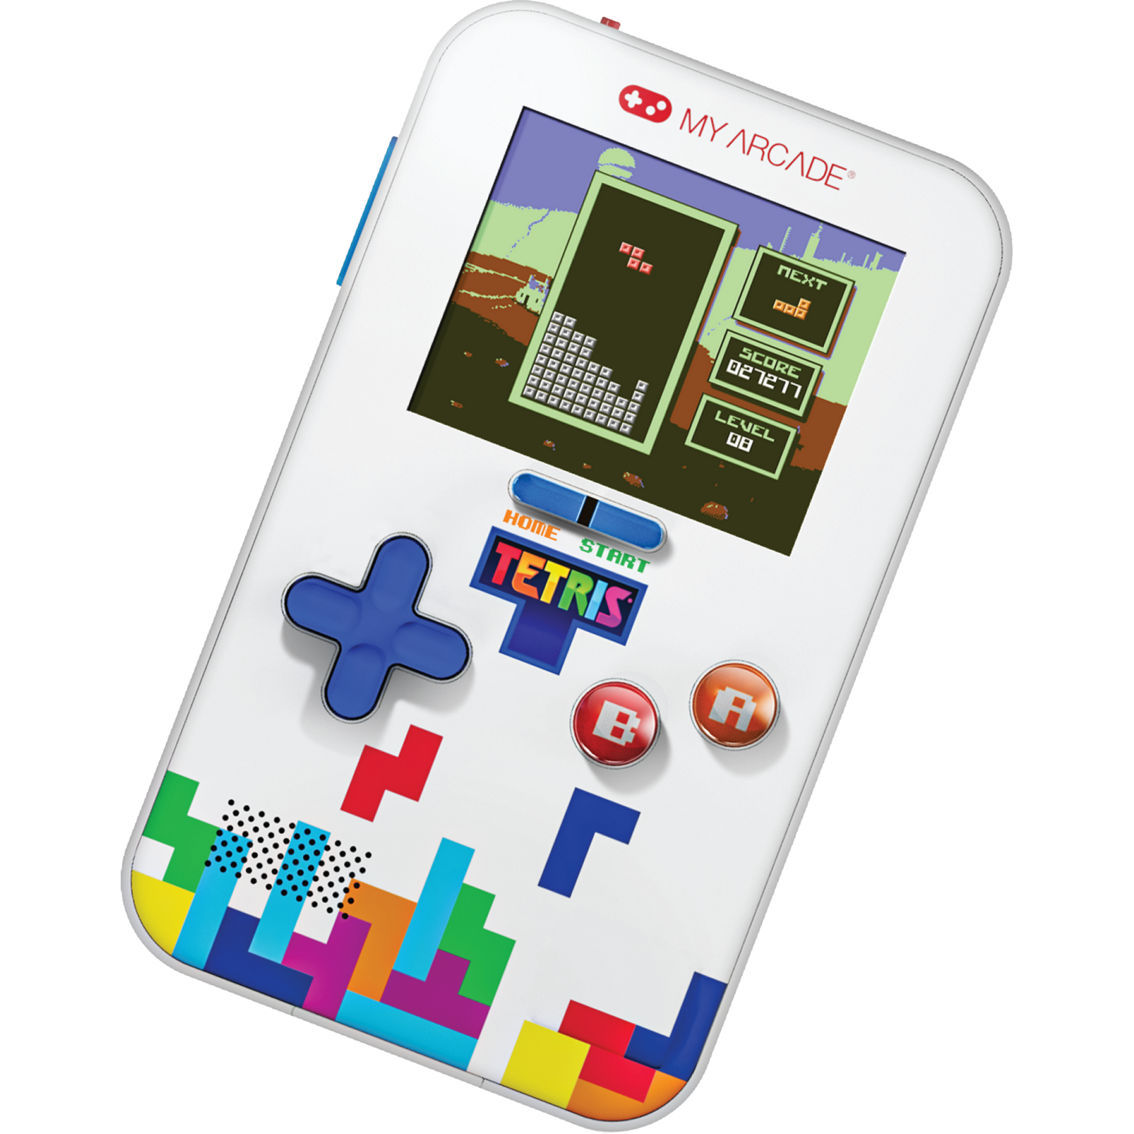 dreamGEAR Tetris Go Gamer Portable Video Game System - Image 2 of 2